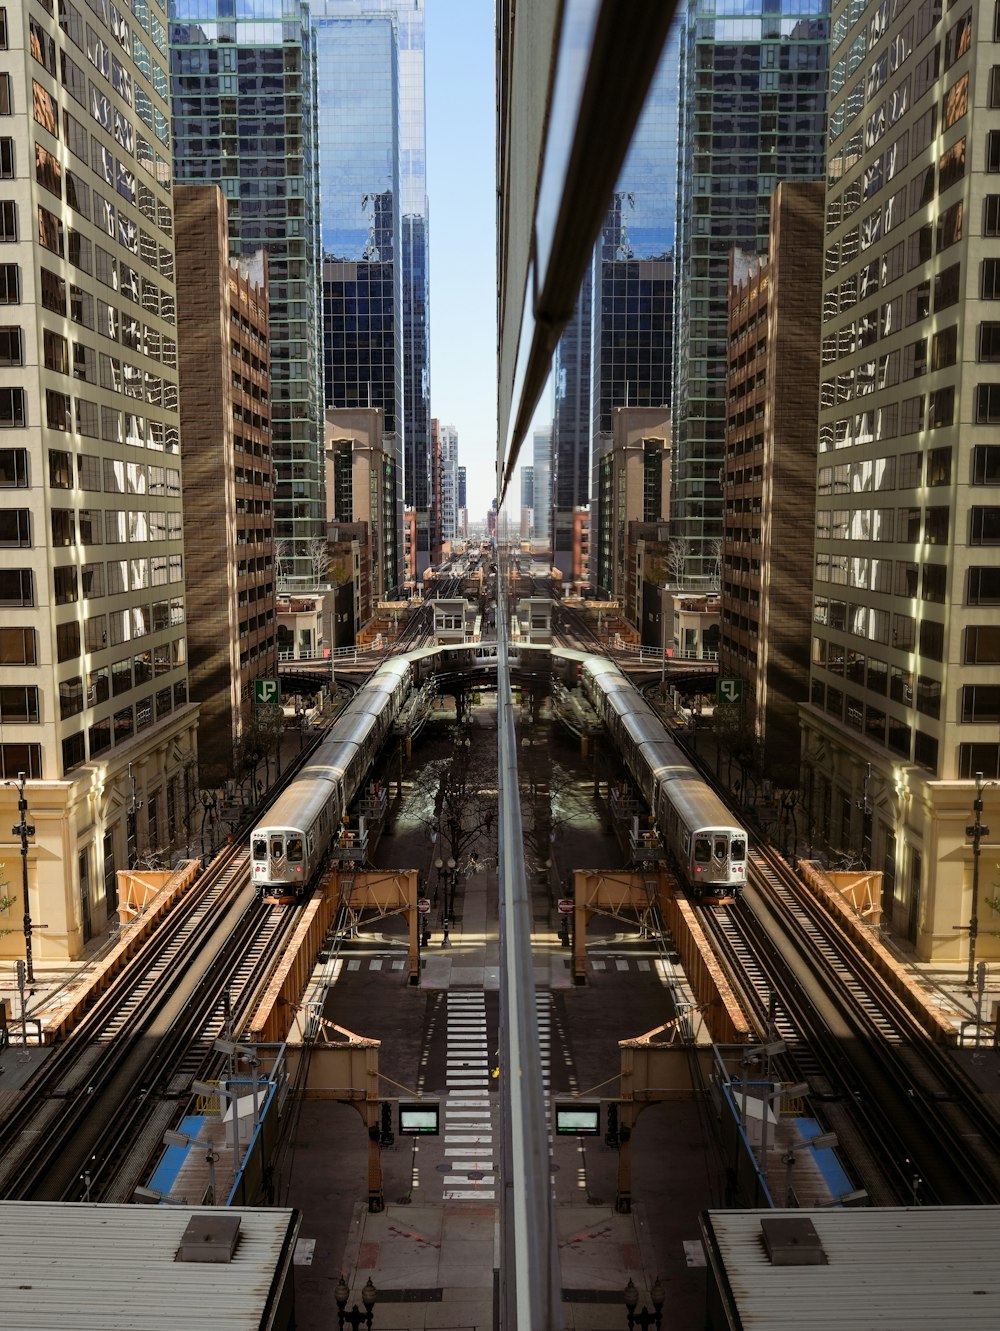 a view of a train station in a city